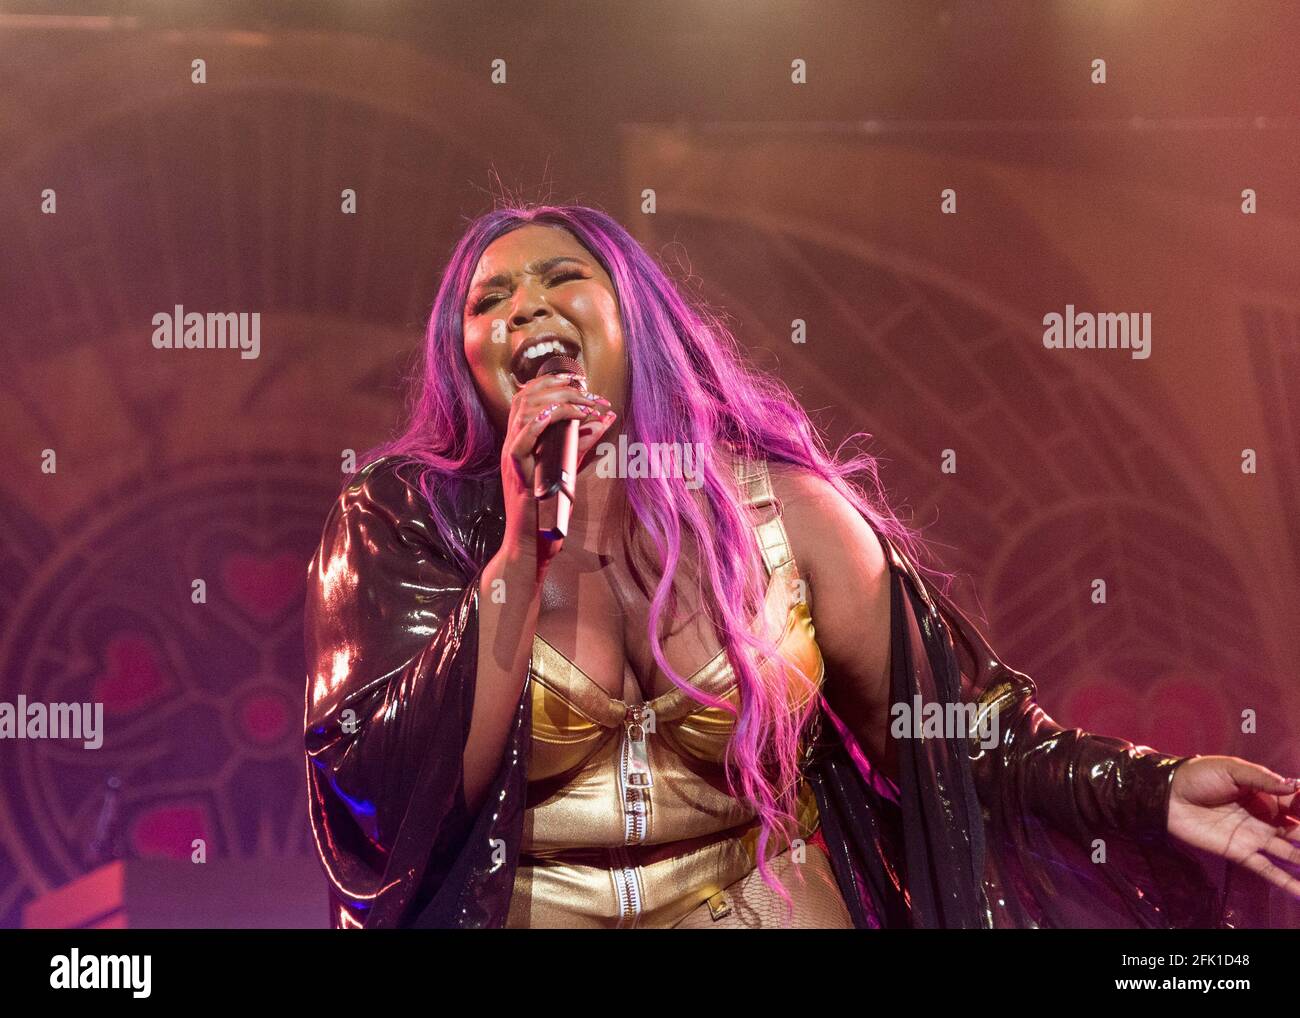 Houston, USA. 04th Oct, 2019. Lizzo performs at a sold out Revention Center in Houston, Texas on October 04, 2019. Lizzo will celebrate her 33rd birthday on April 27, 2021. (Photo by Jennifer Lake/Sipa USA) Credit: Sipa USA/Alamy Live News Stock Photo